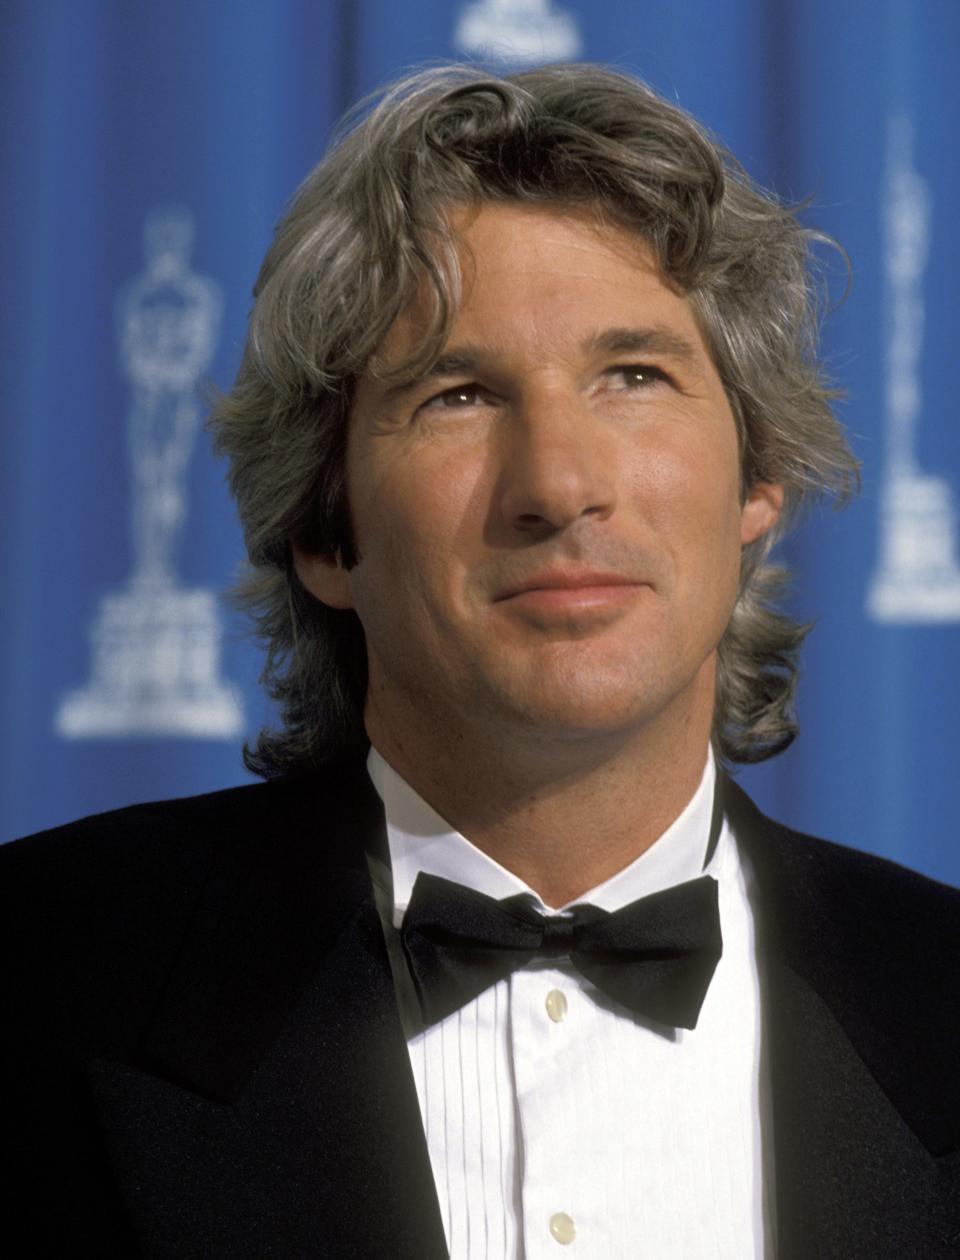 Richard Gere during 65th Annual Academy Awards at Shrine Auditorium in Los Angeles.